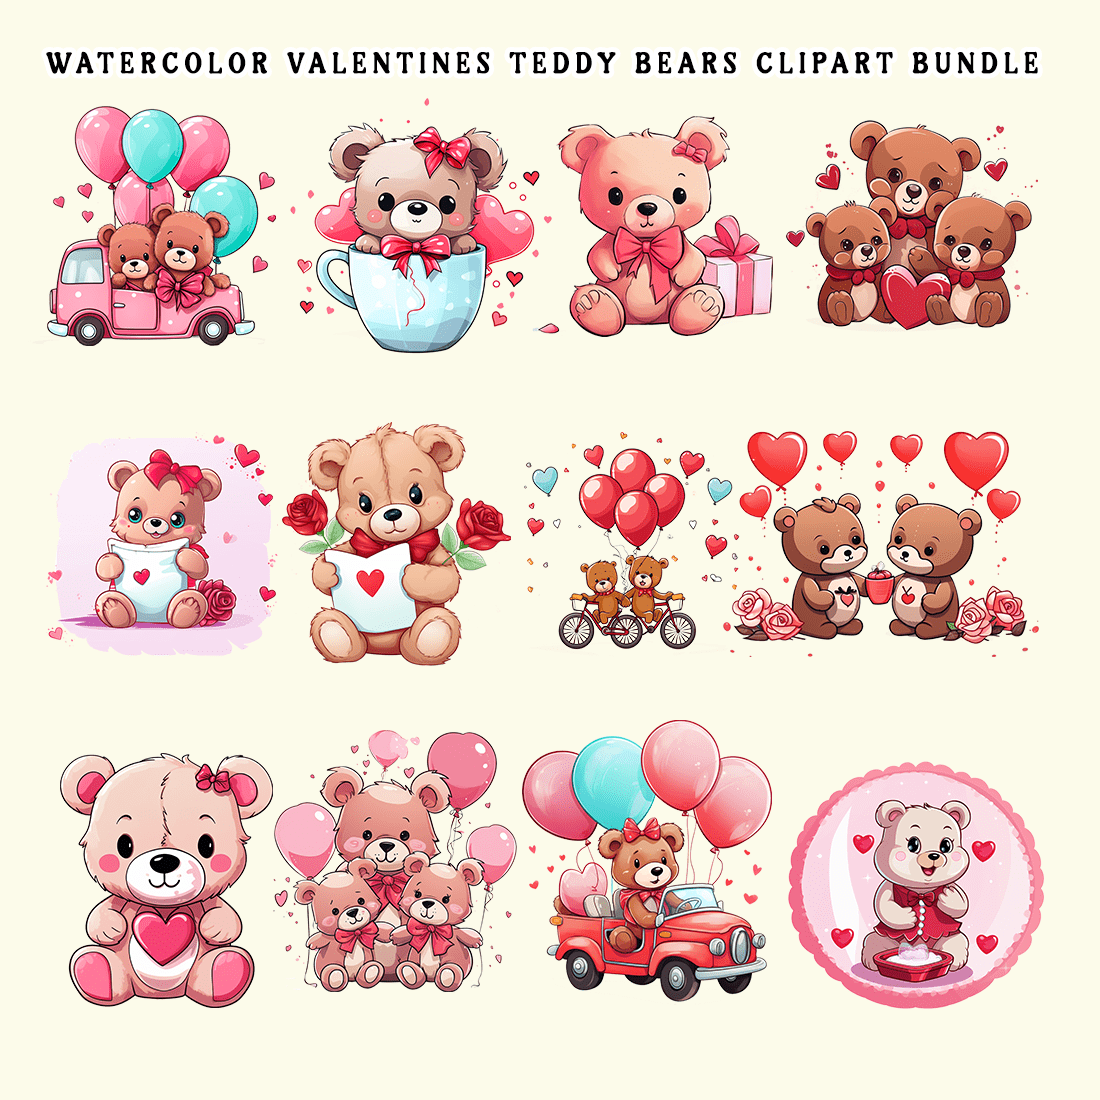 Watercolor Valentines Teddy Bears Clipart Bundle preview image.